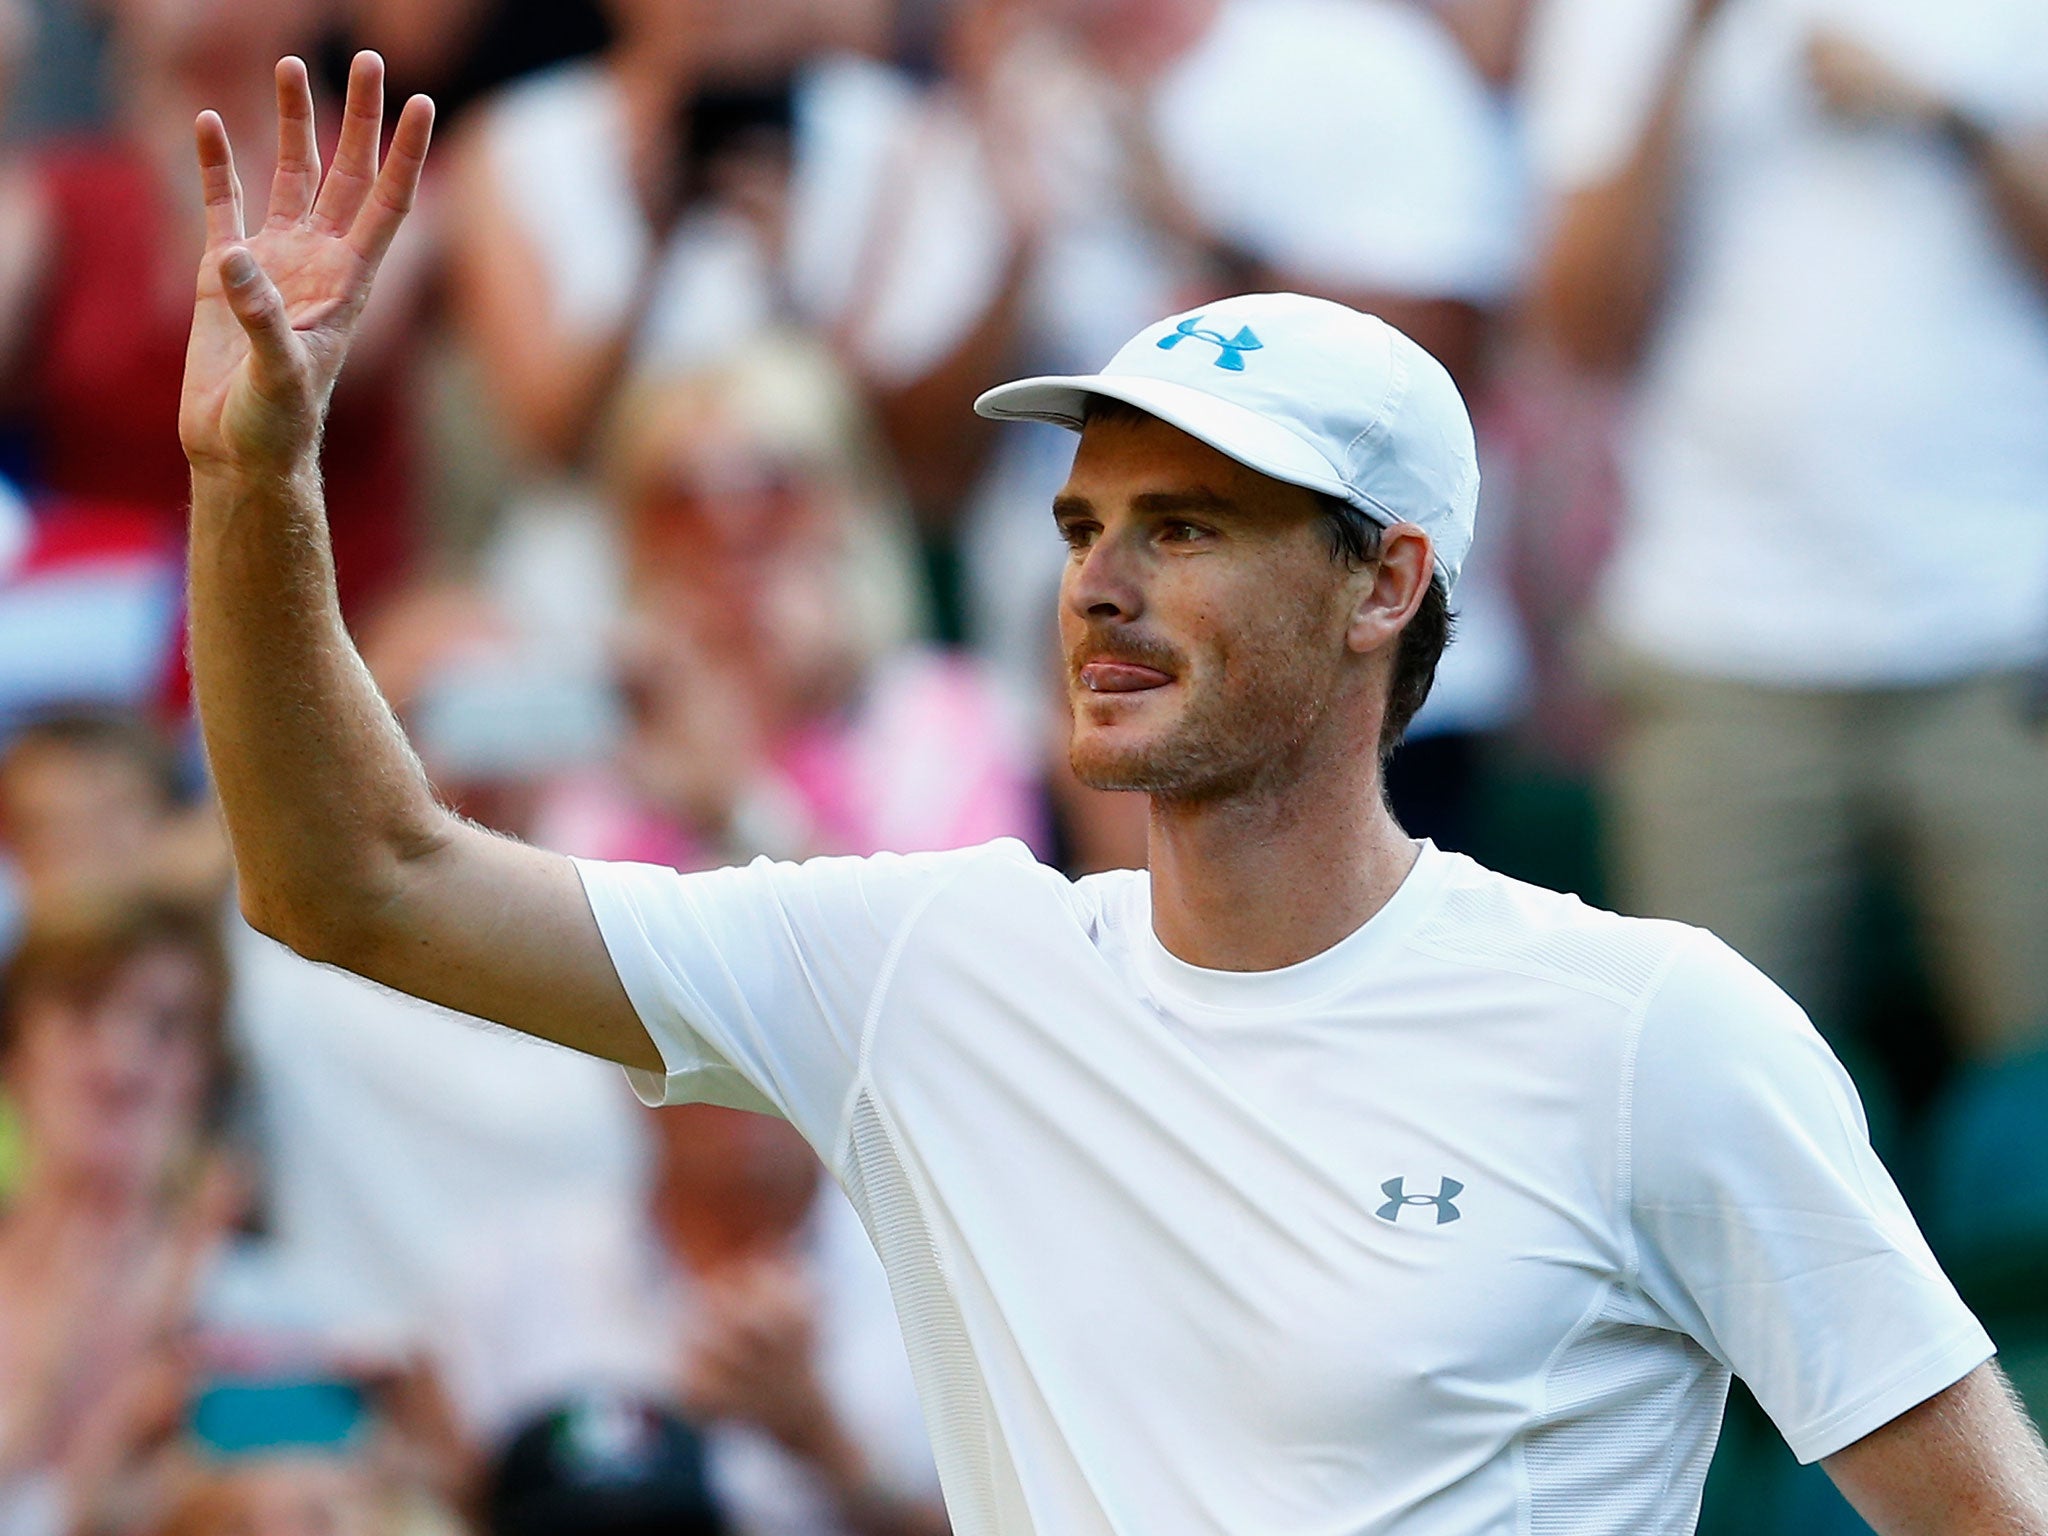 Jamie Murray, who won the mixed doubles title in 2007, has reached another Wimbledon final